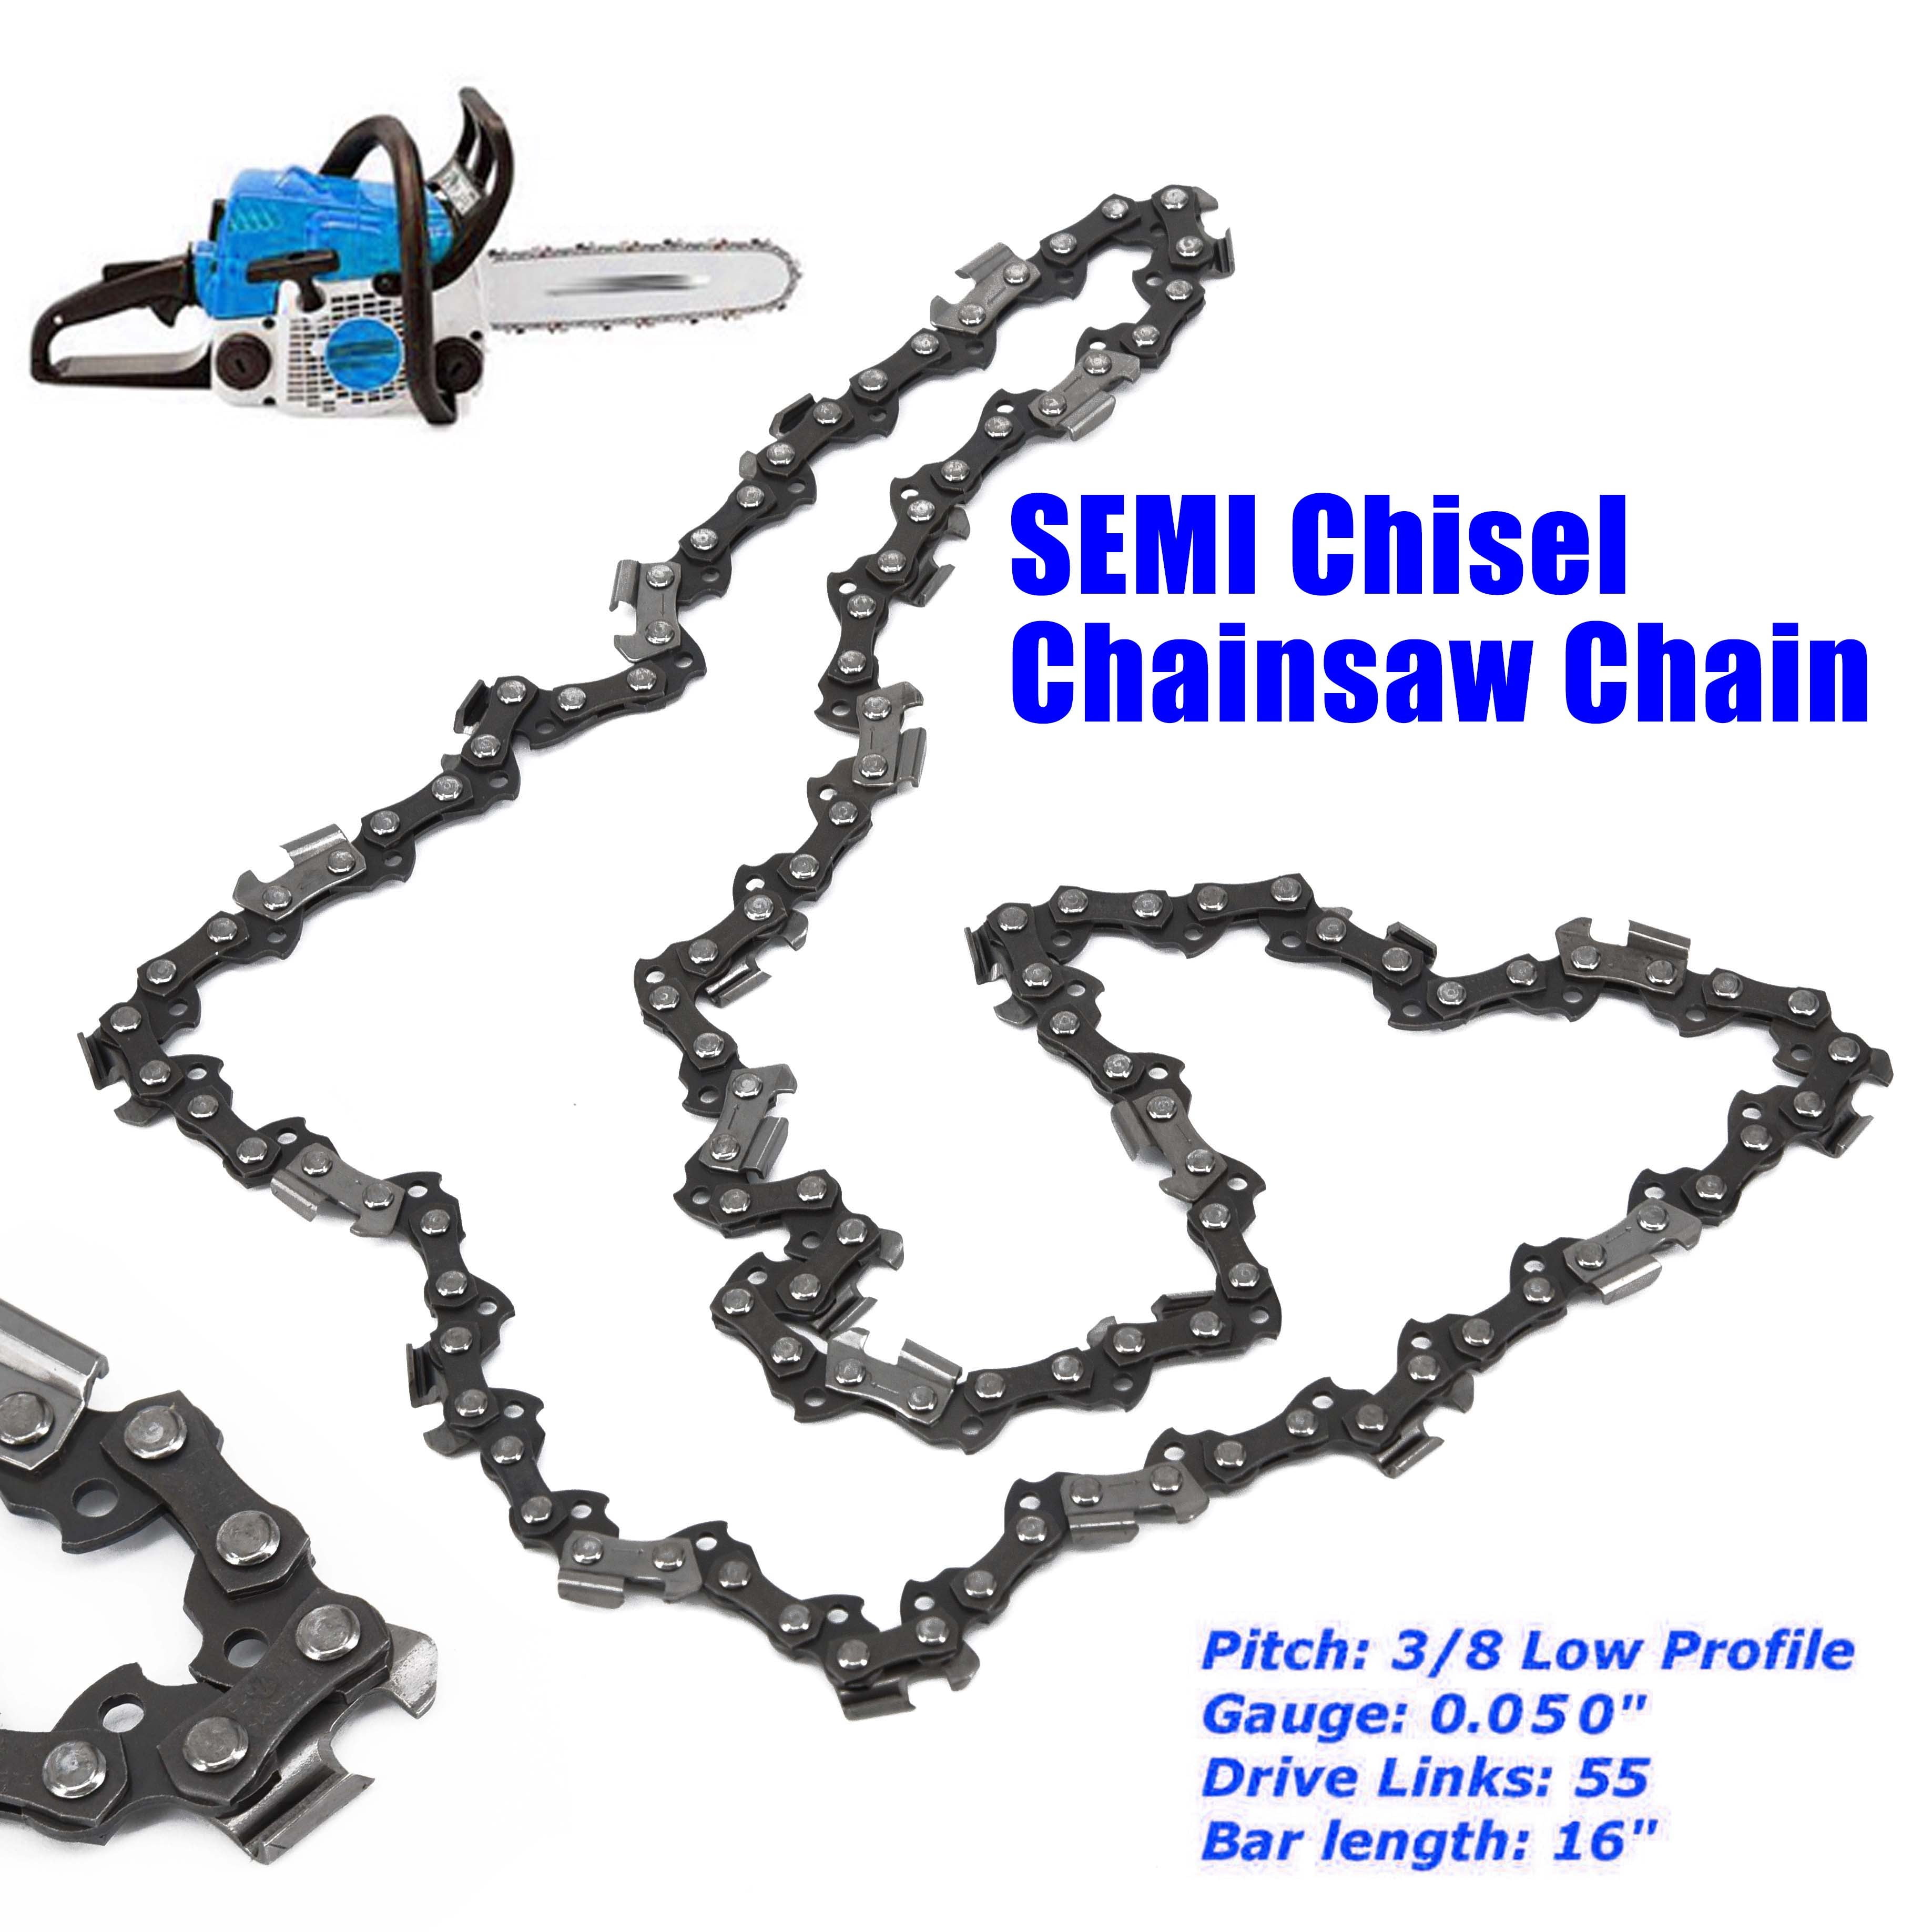 STIHL 3/8 Pitch PS RACING CHAIN 24 inch Cannon 83 drivers full chisel .050 gauge 